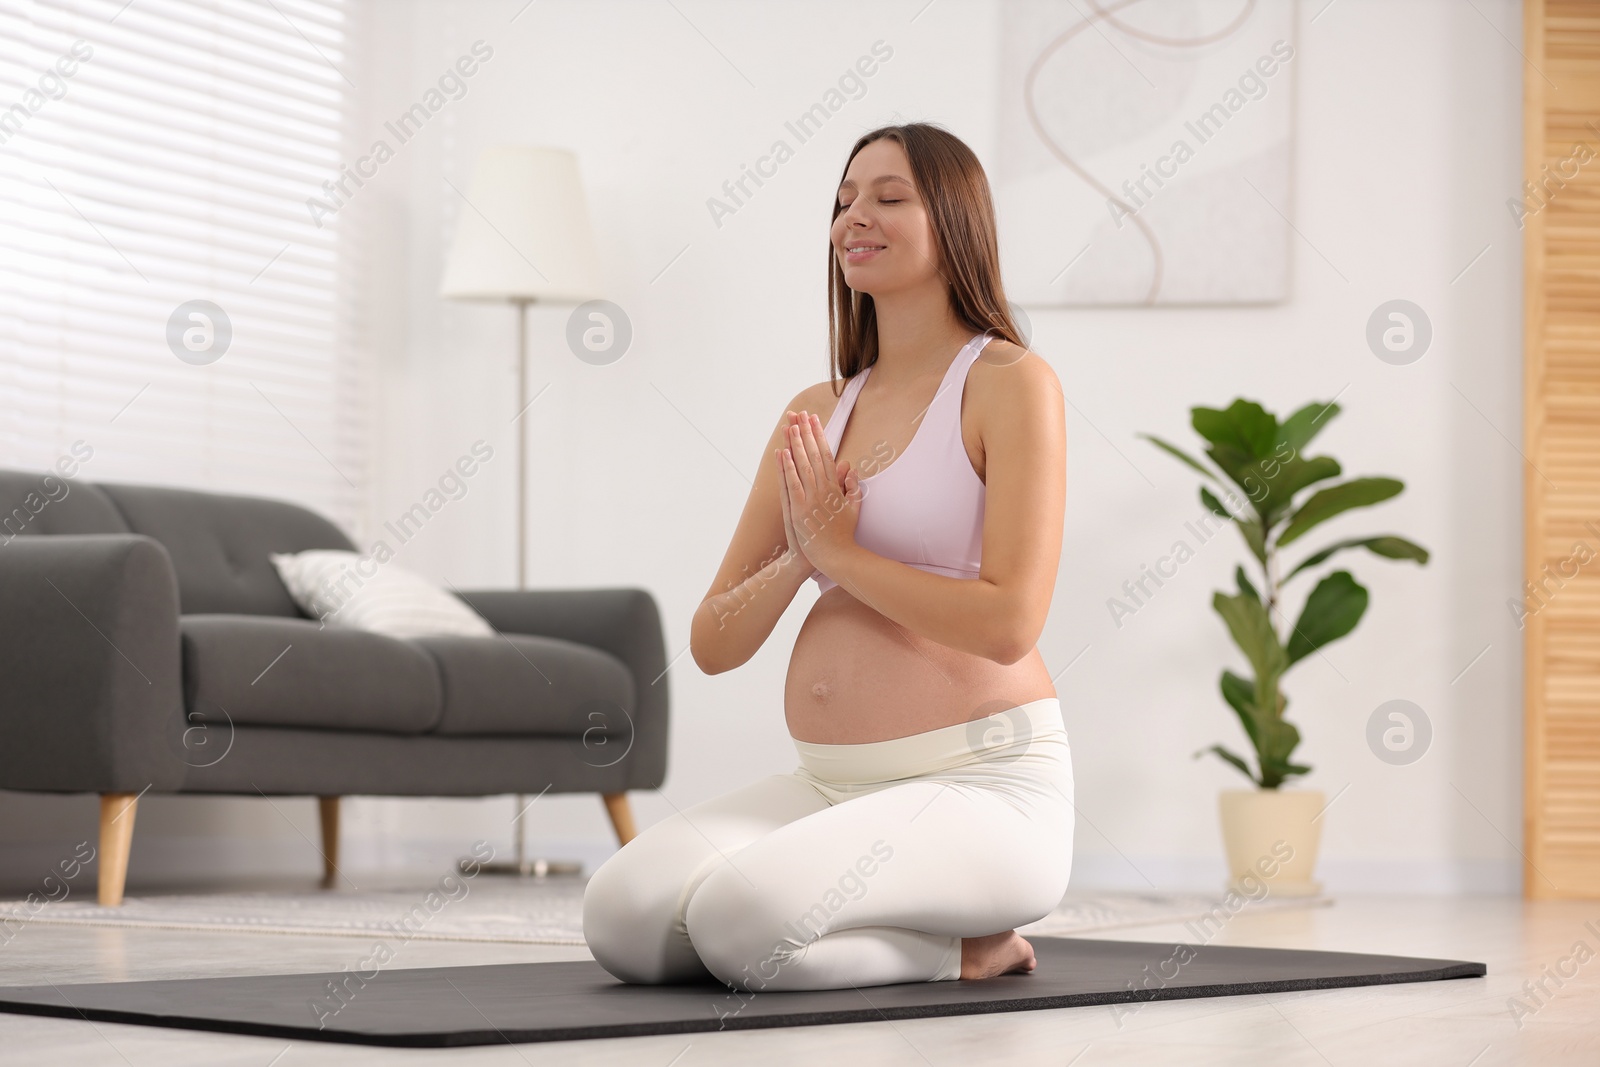 Photo of Pregnant woman meditating on yoga mat at home, space for text